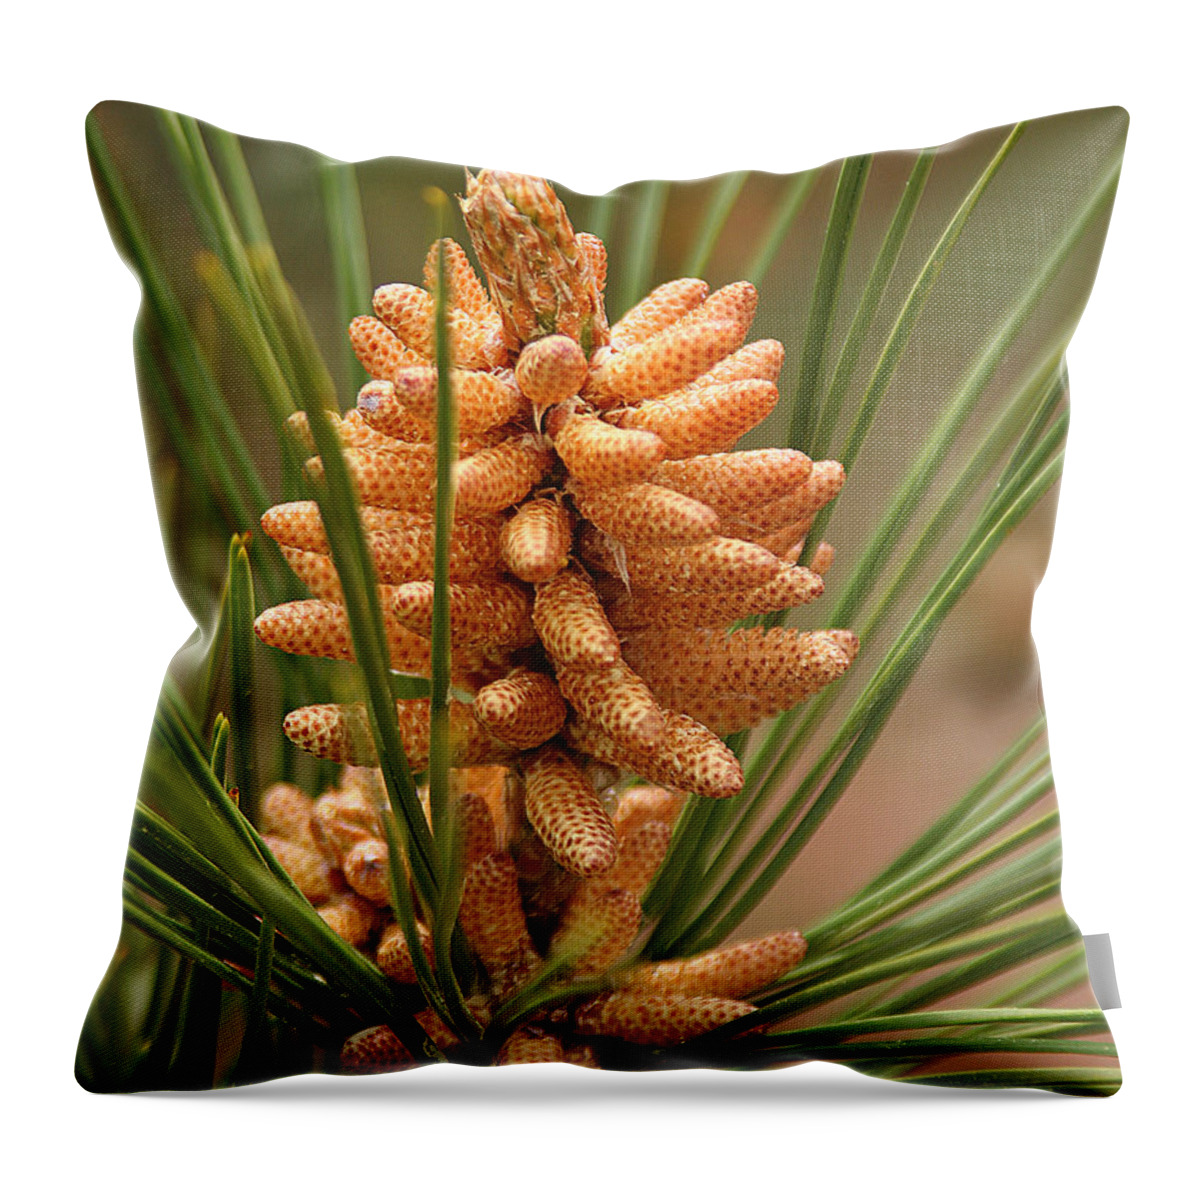 Nature Throw Pillow featuring the photograph Nascent Pinecone by William Selander